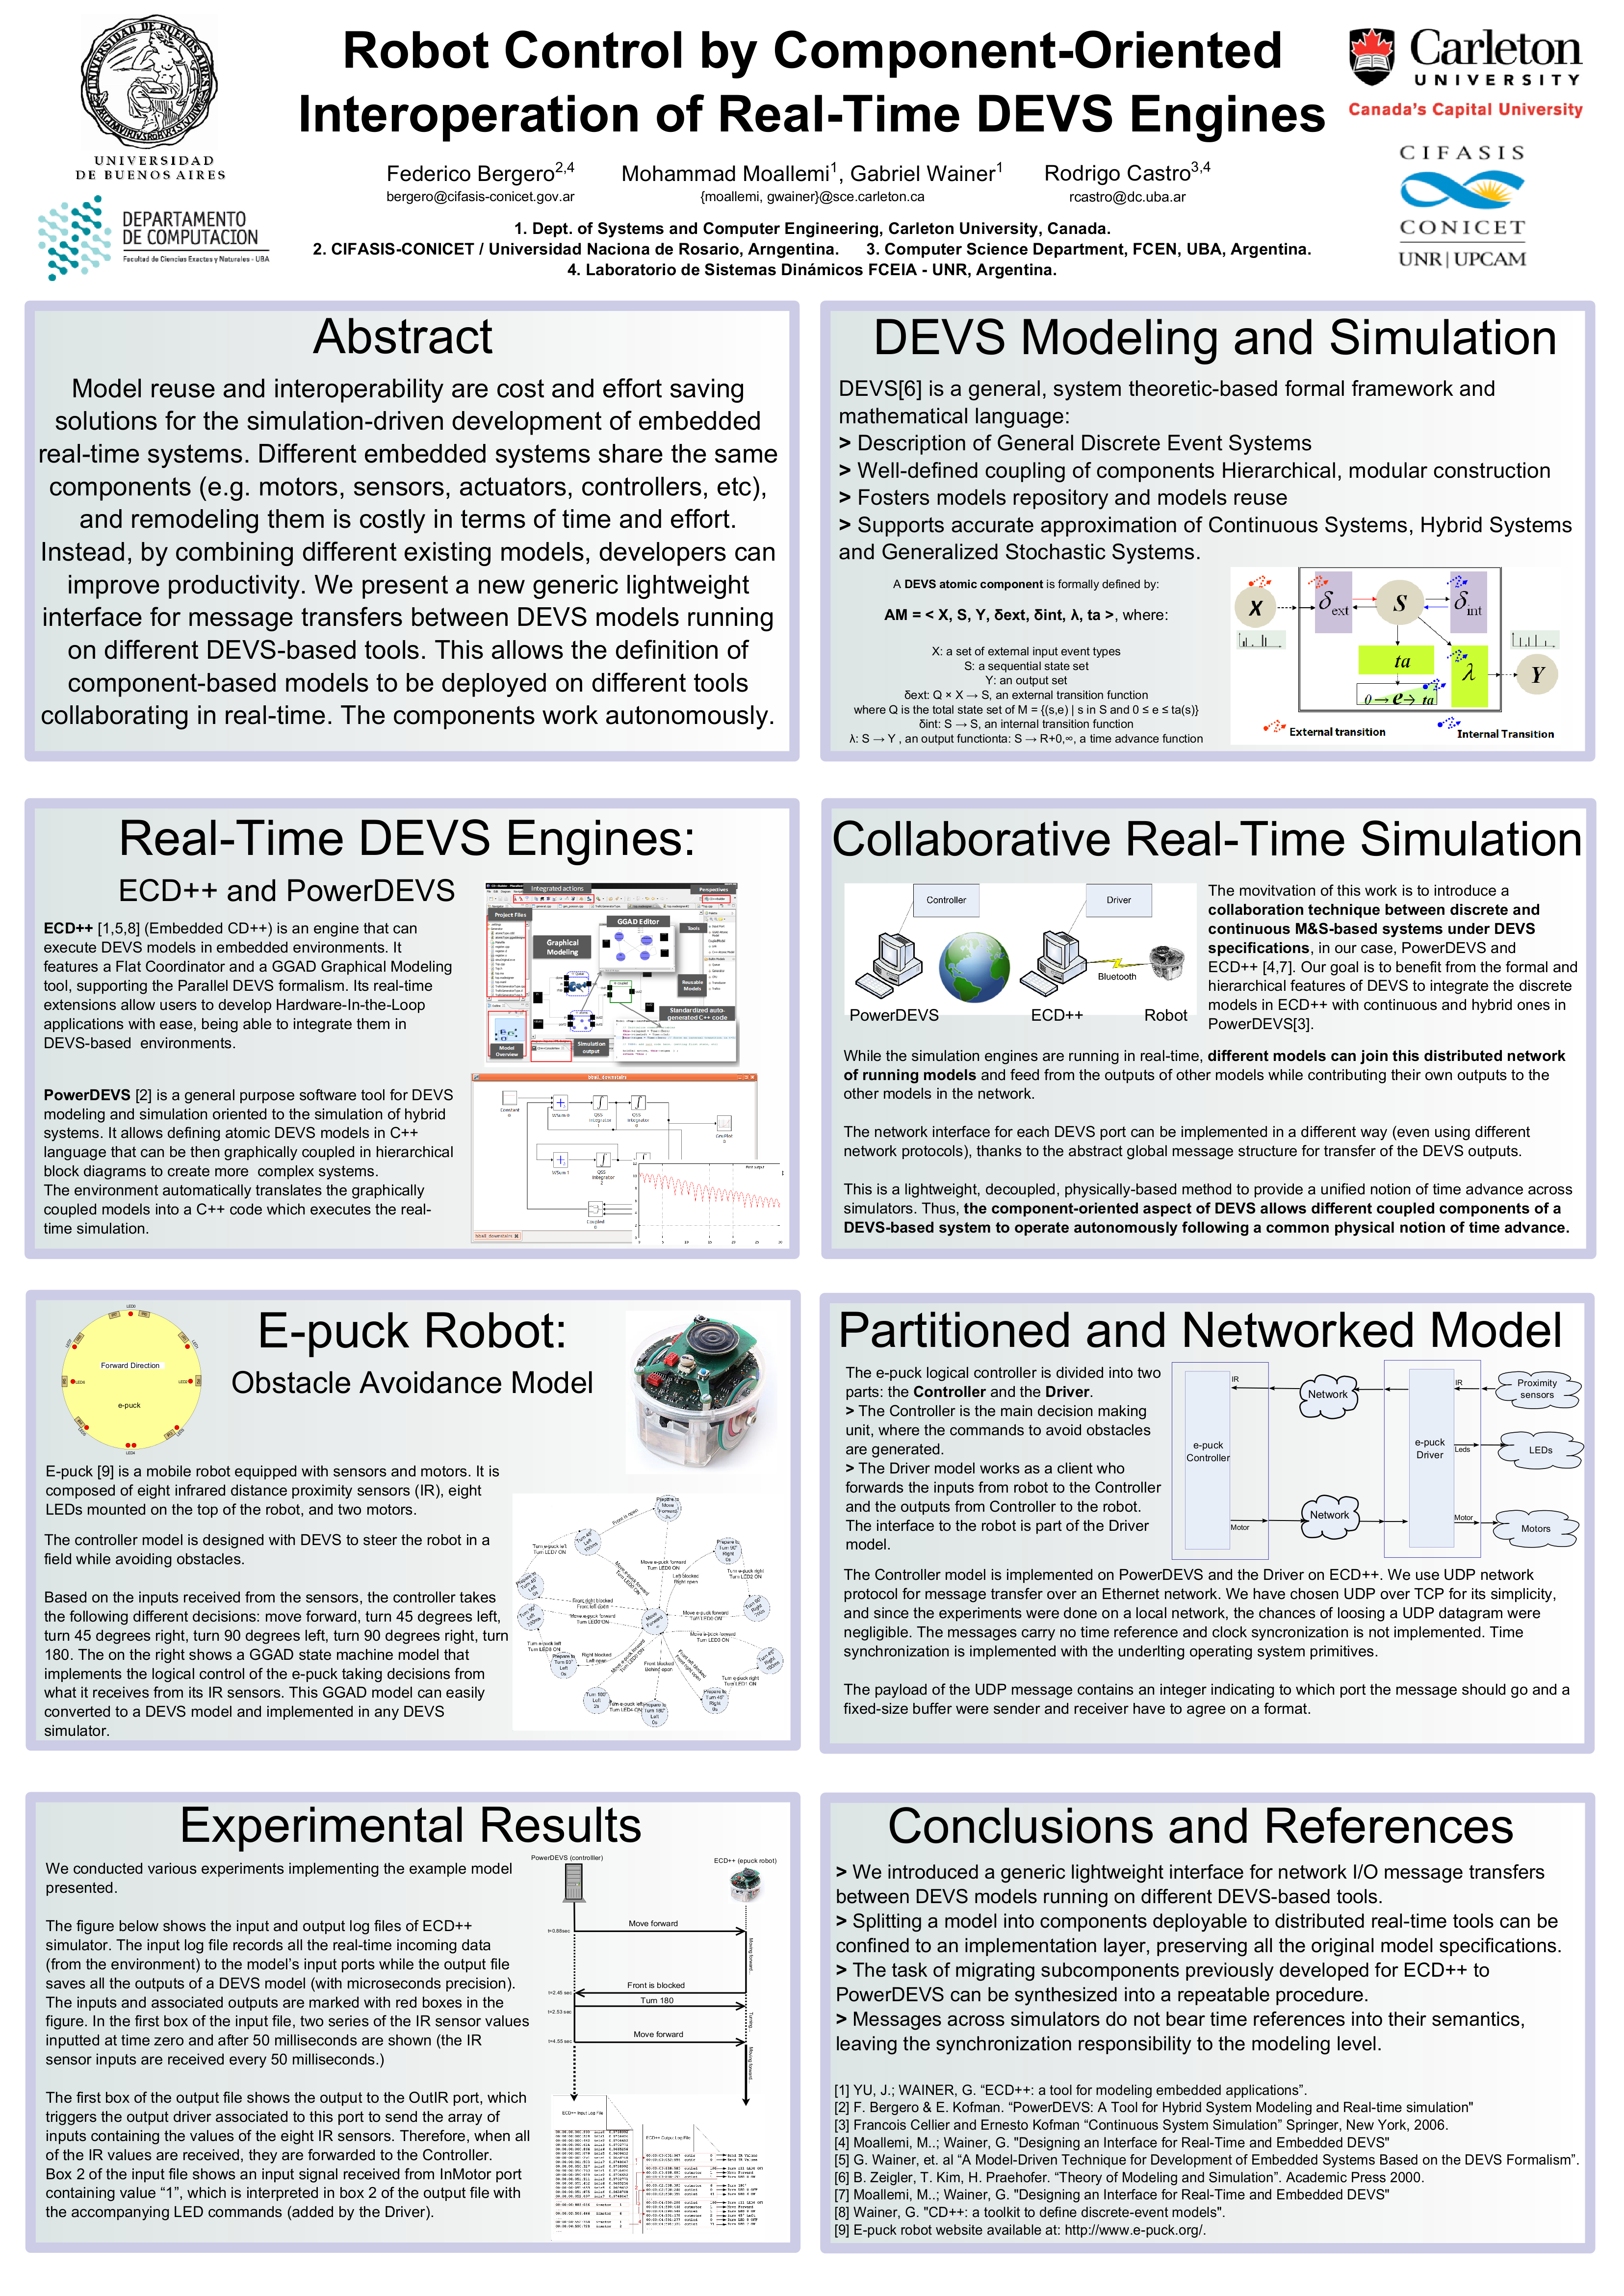 Robot Control by Component-Oriented Interoperation of Real-Time DEVS Engines